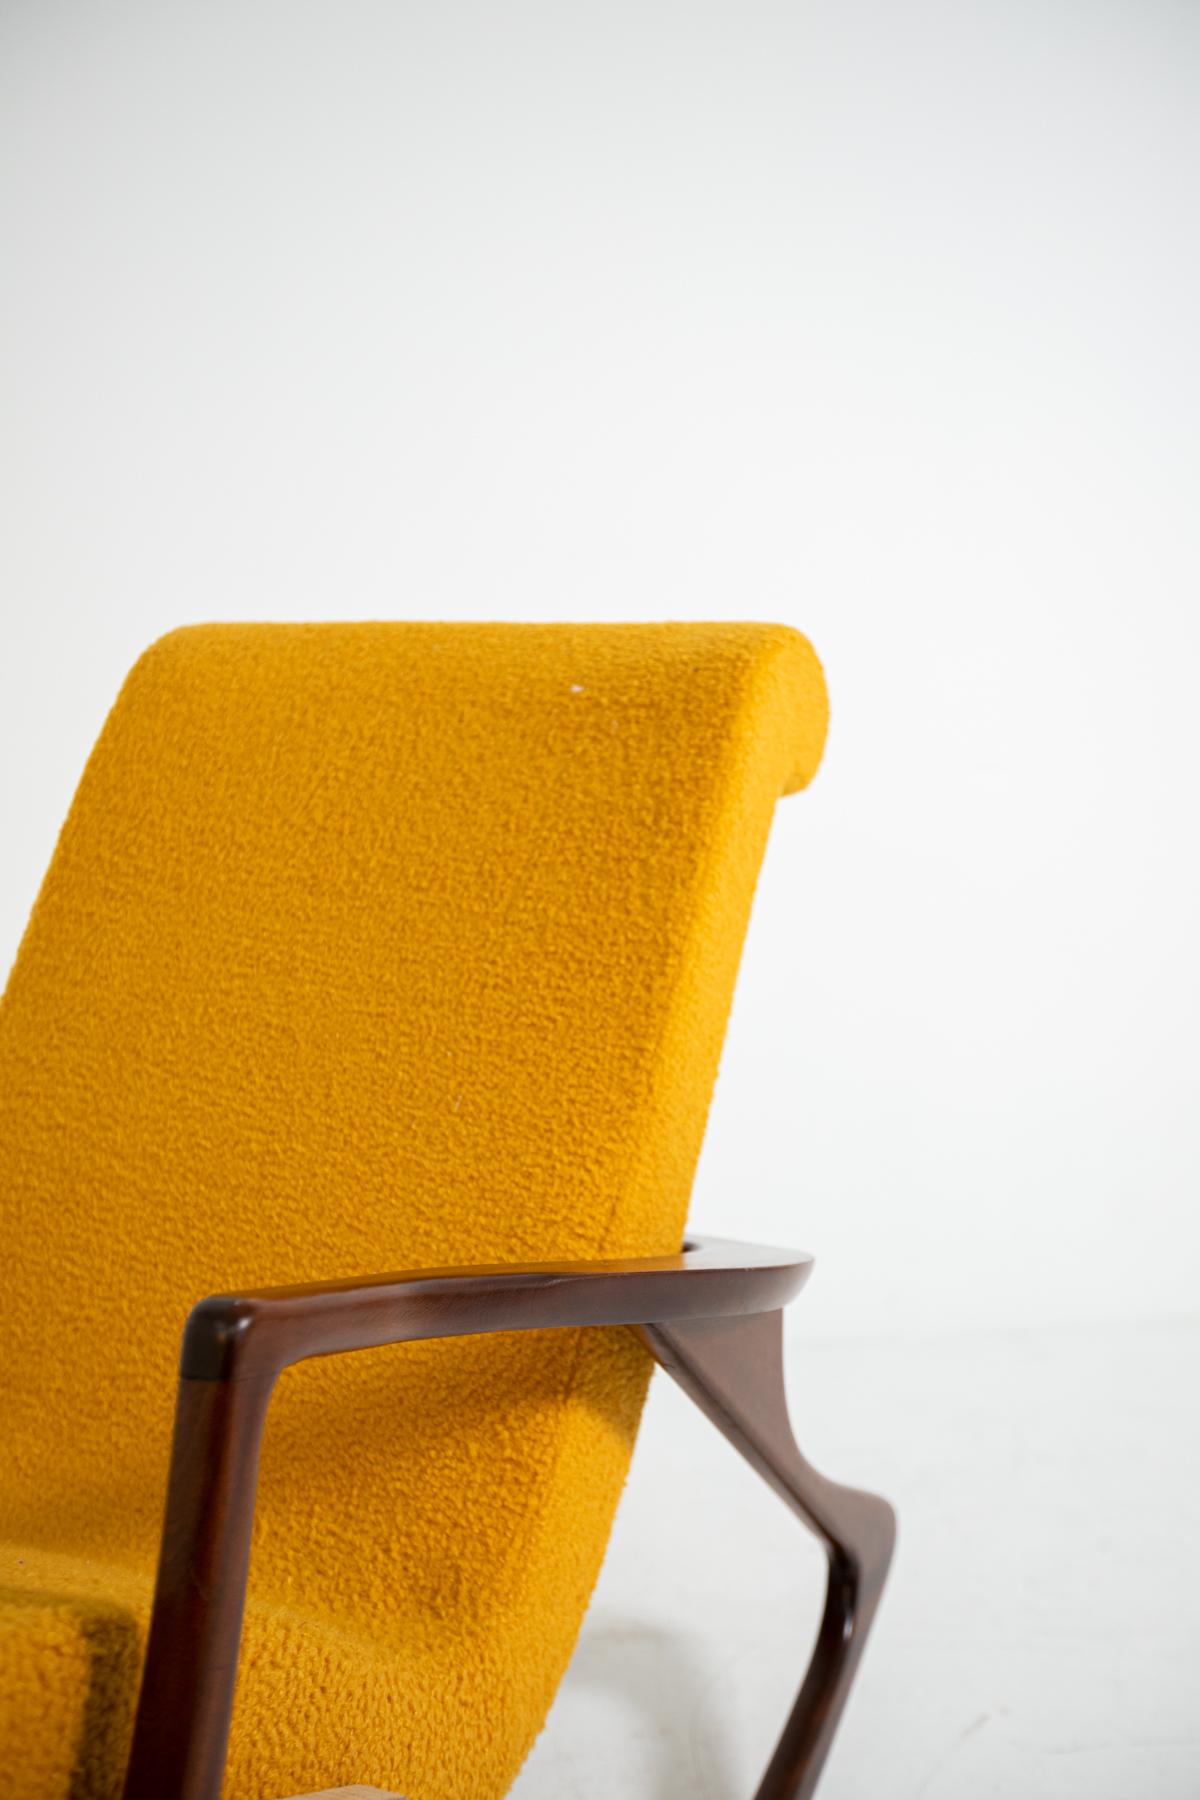 Elegant and sculptural midcentury American rocking chair. The armchair has been restored and refreshed in an elegant yellow bouclè. The seat and its back are one piece to give comfort to its guest. Its frame is made of walnut wood. Its fluid and